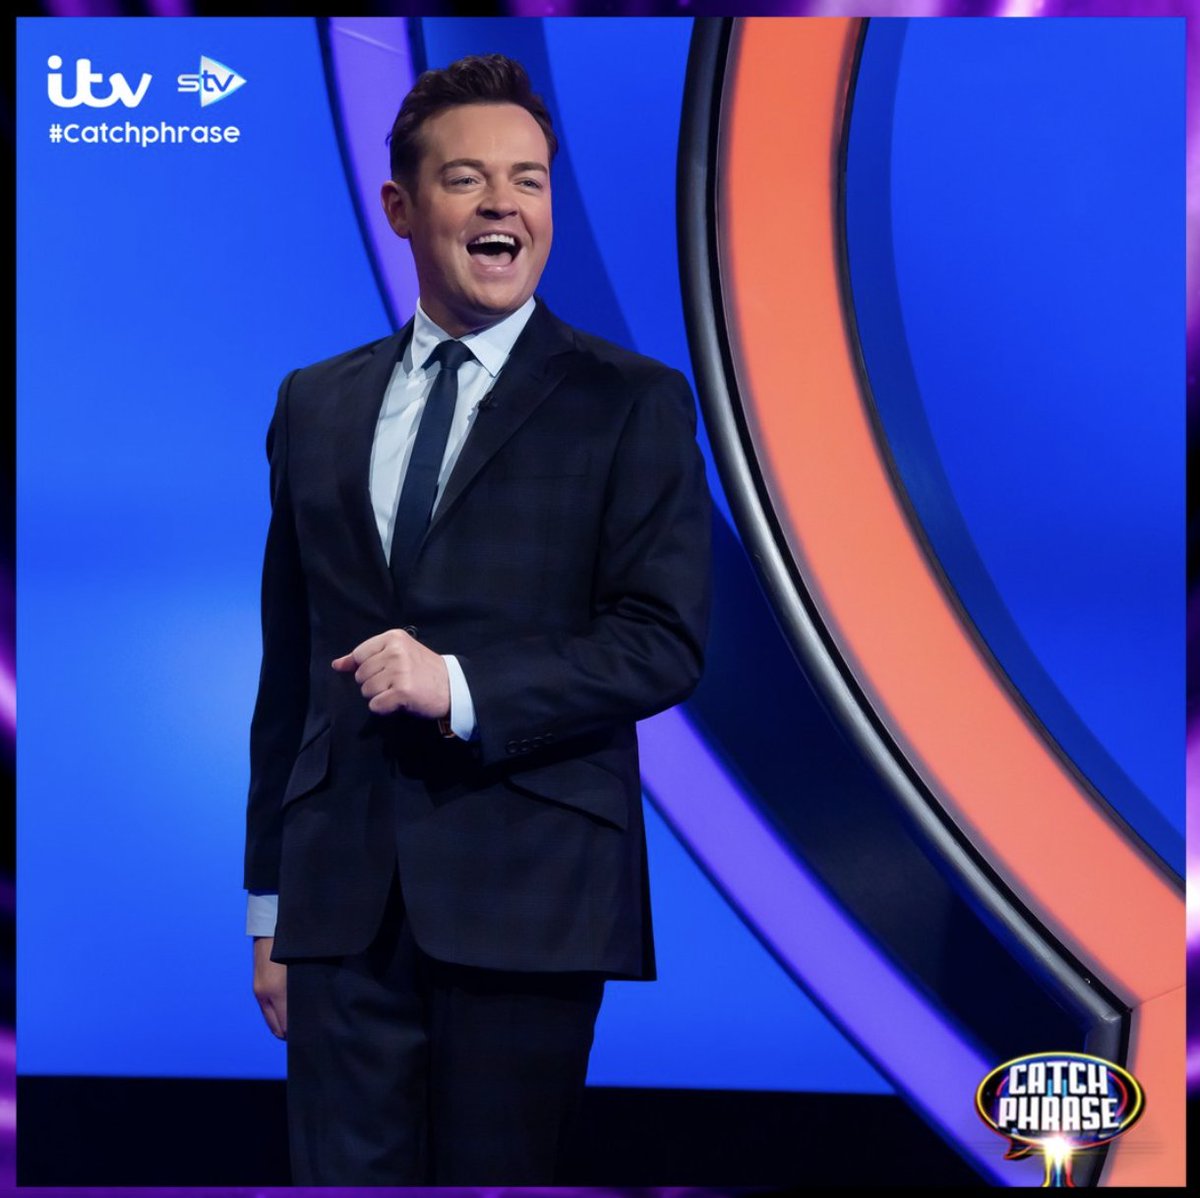 HAPPY BIRTHDAY to the one and only @StephenMulhern! 🎉🎊🎉🥳